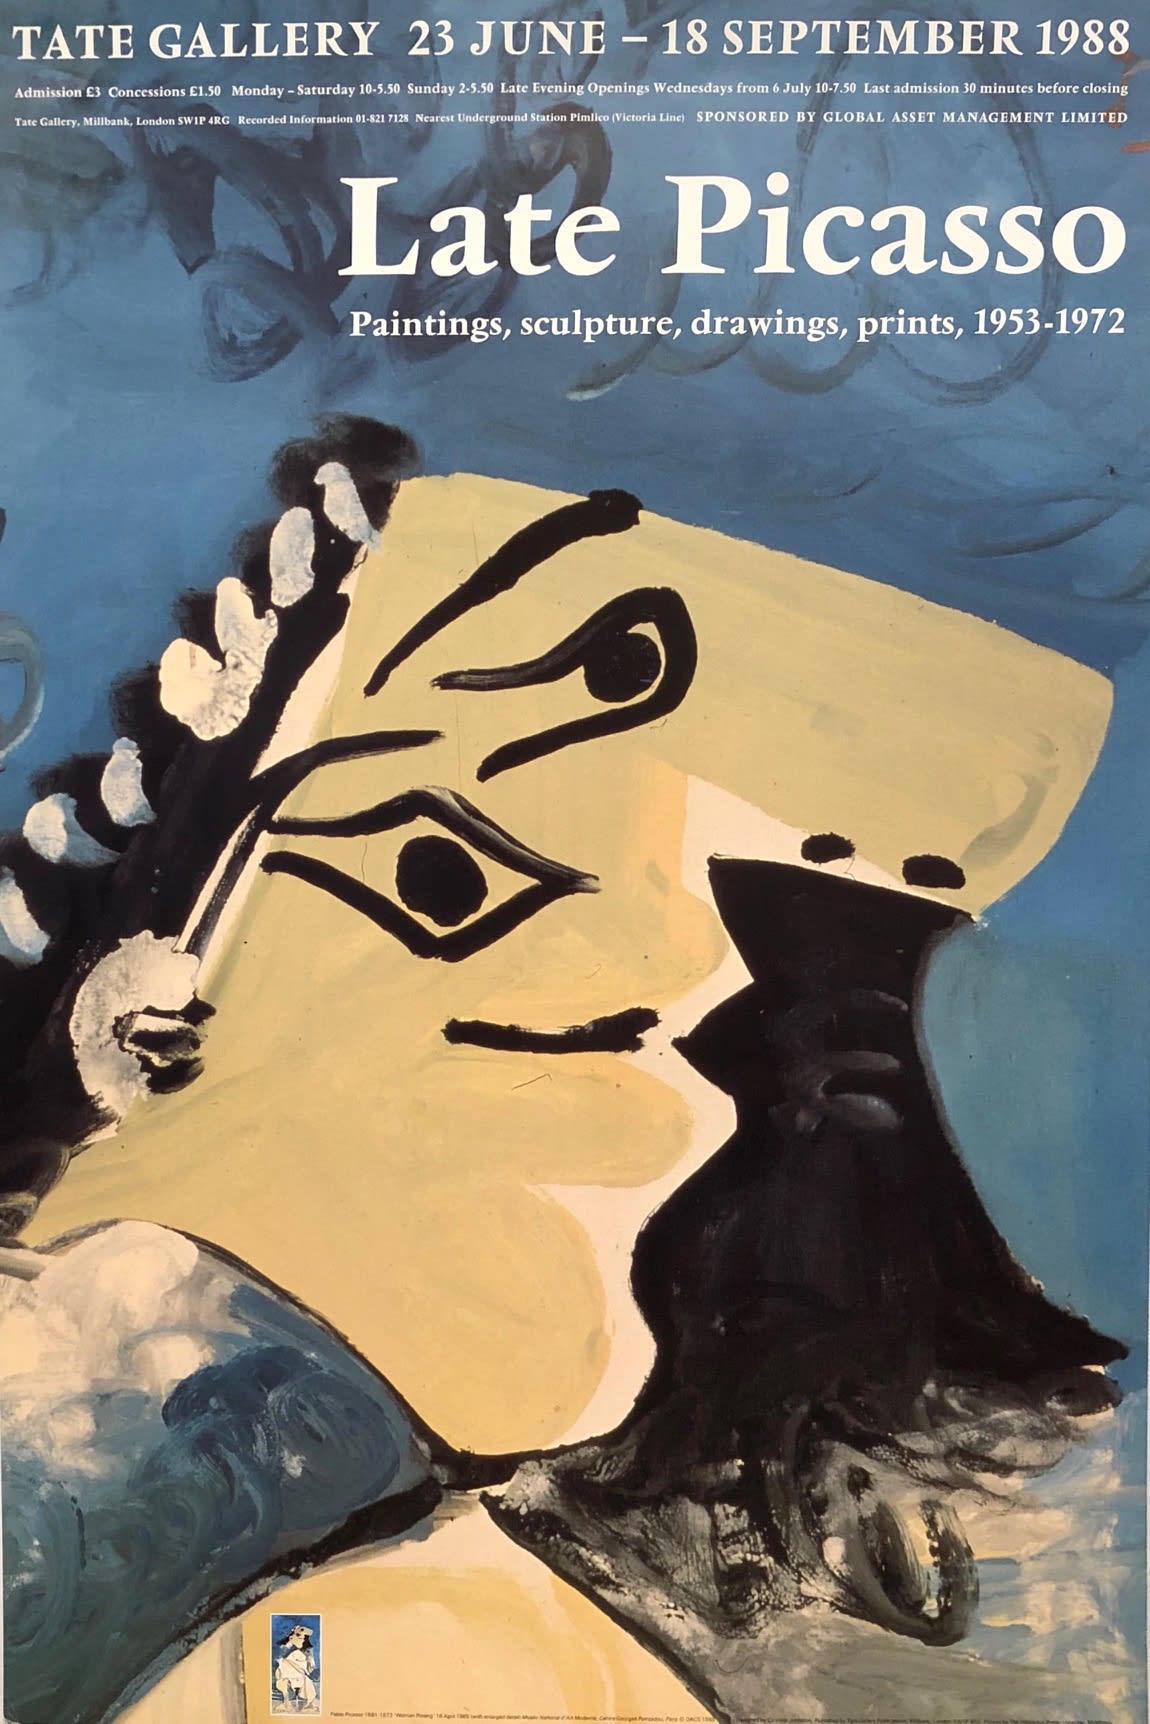 Picasso Drawings and Prints at The San Diego Museum of Art  A Spanish  cultural event in San Diego from 07/30/2022 until 01/29/2023